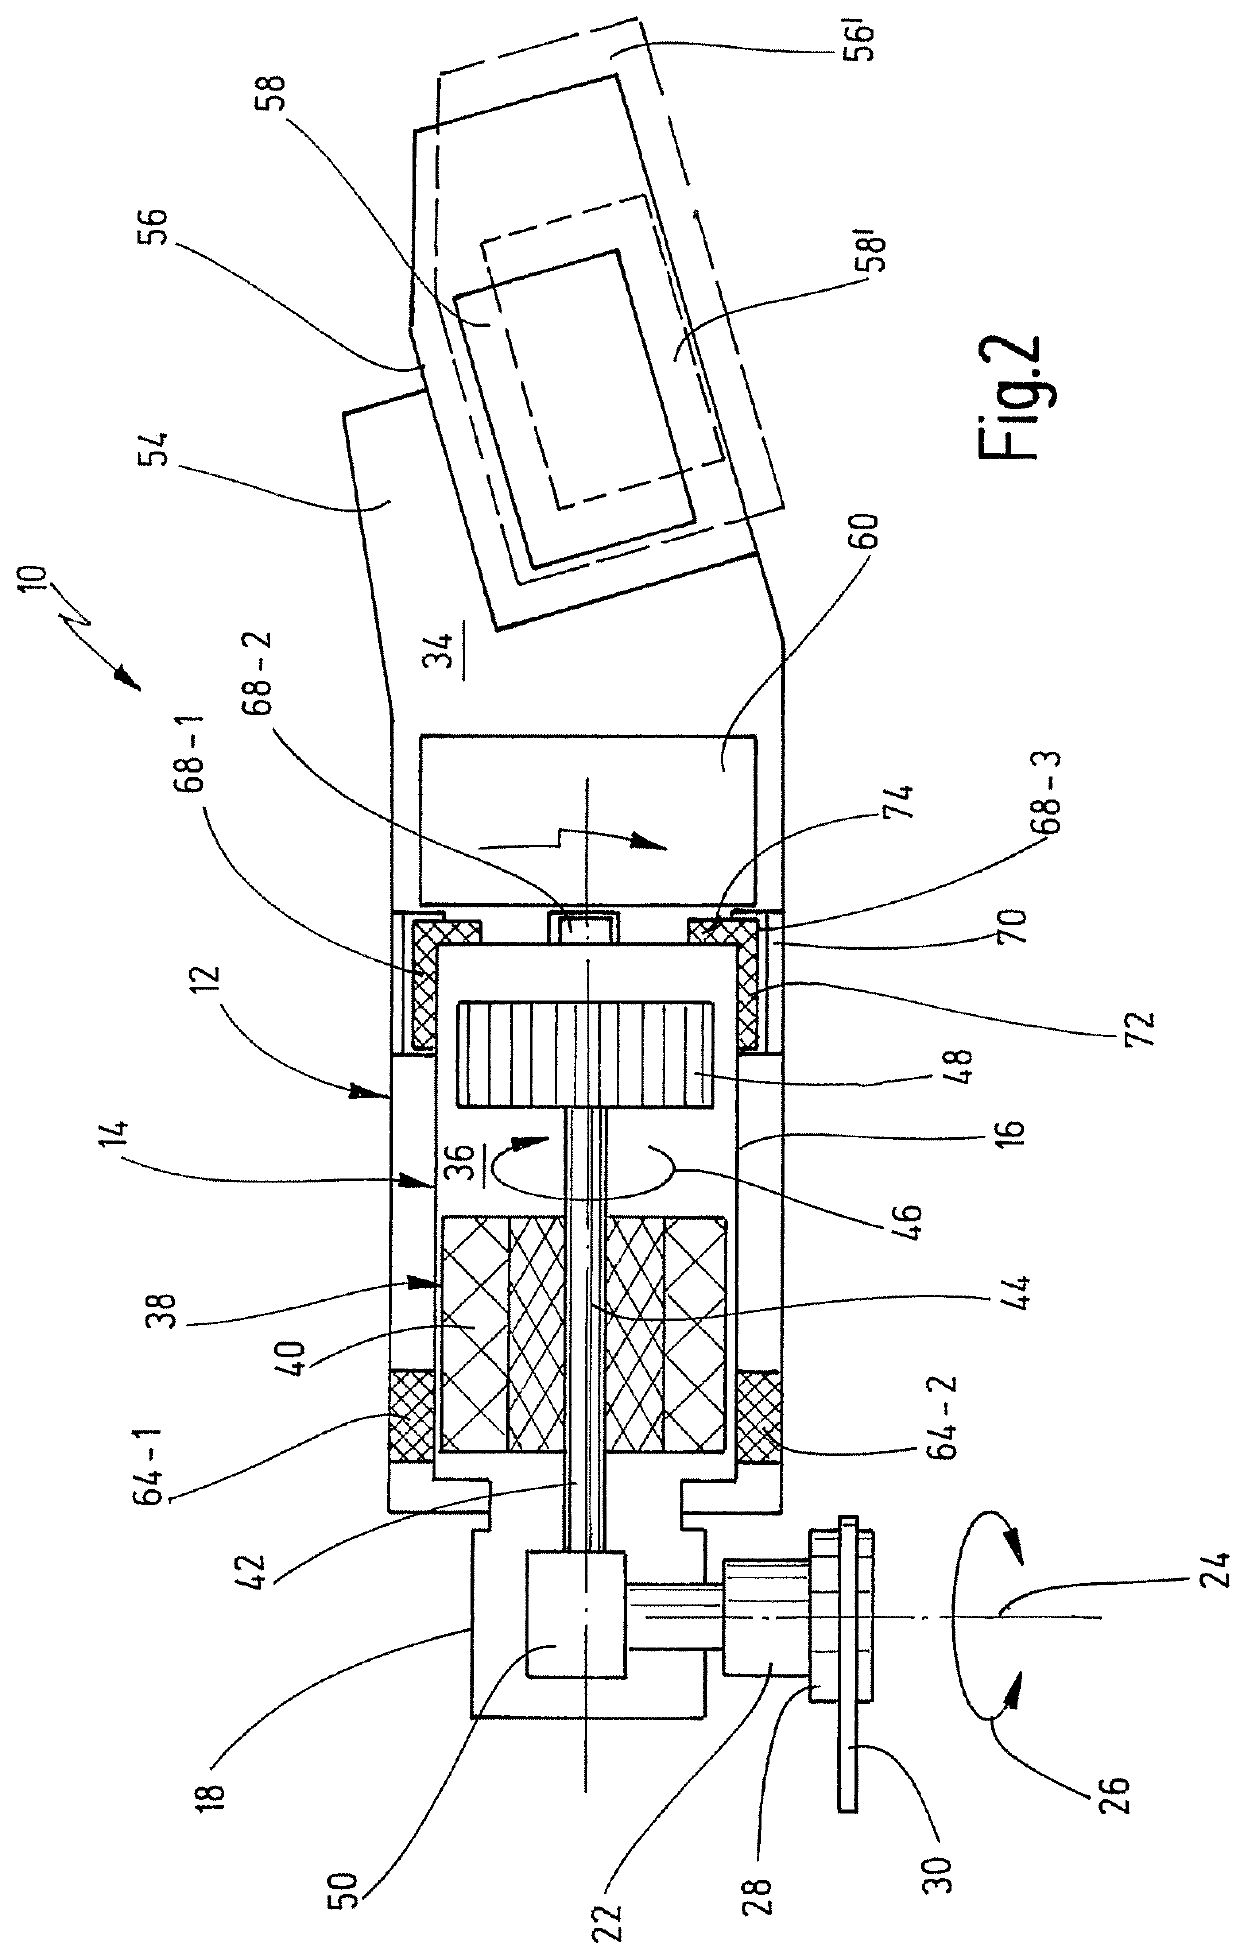 Hand tool comprising vibration damping elements